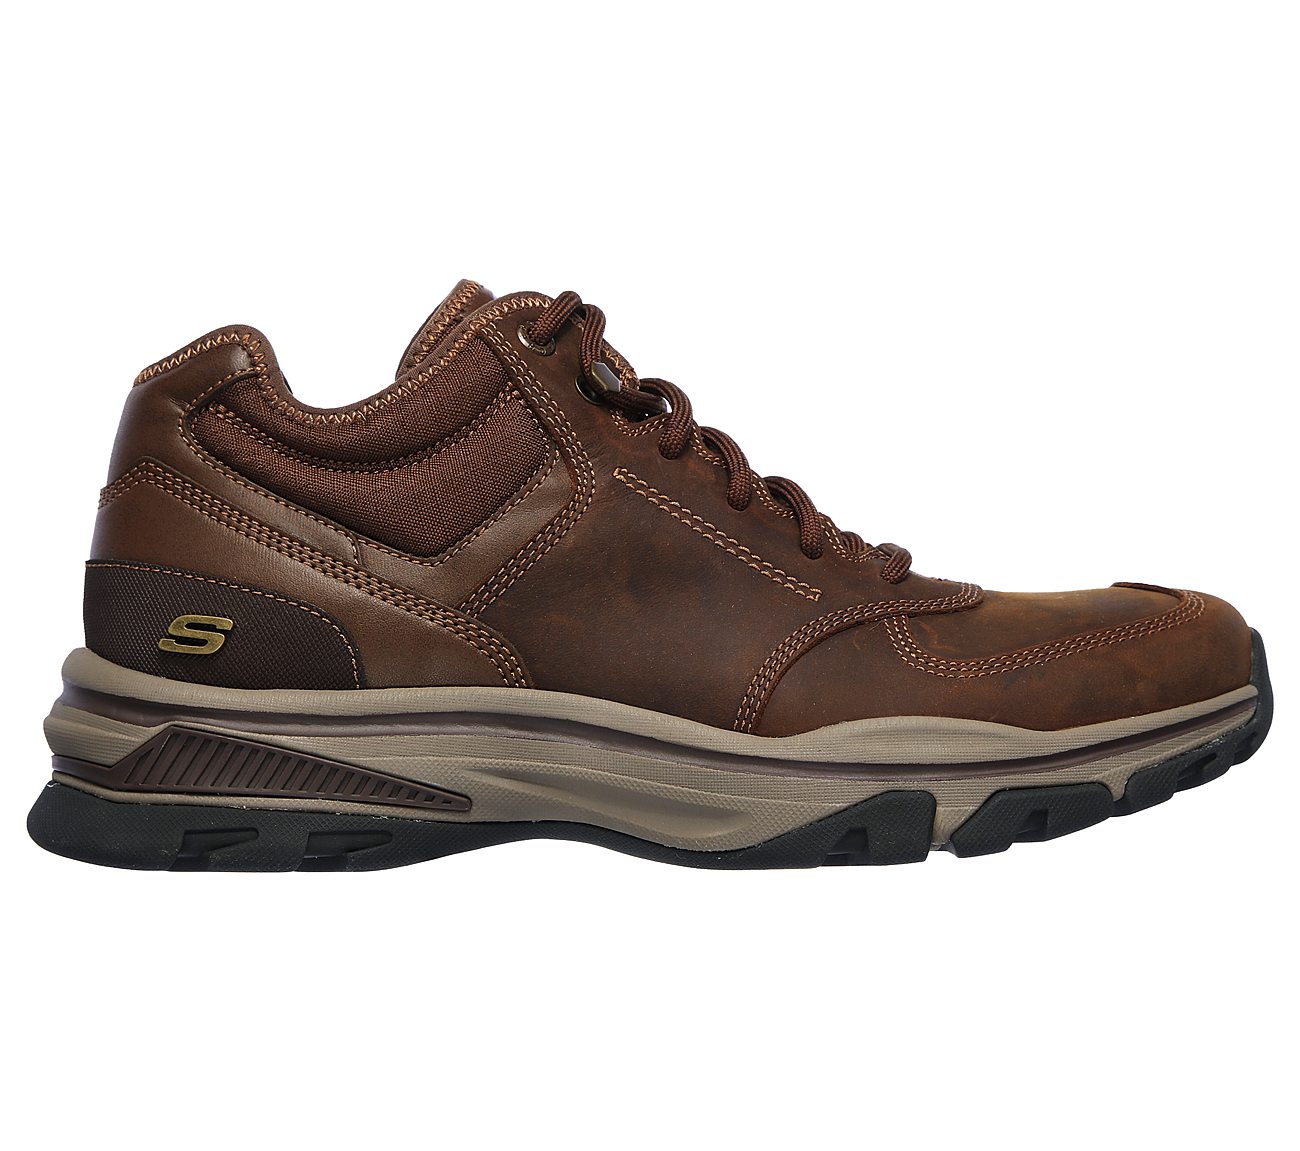 Buy SKECHERS Relaxed Fit: Ralcon - Torado USA Casuals Shoes